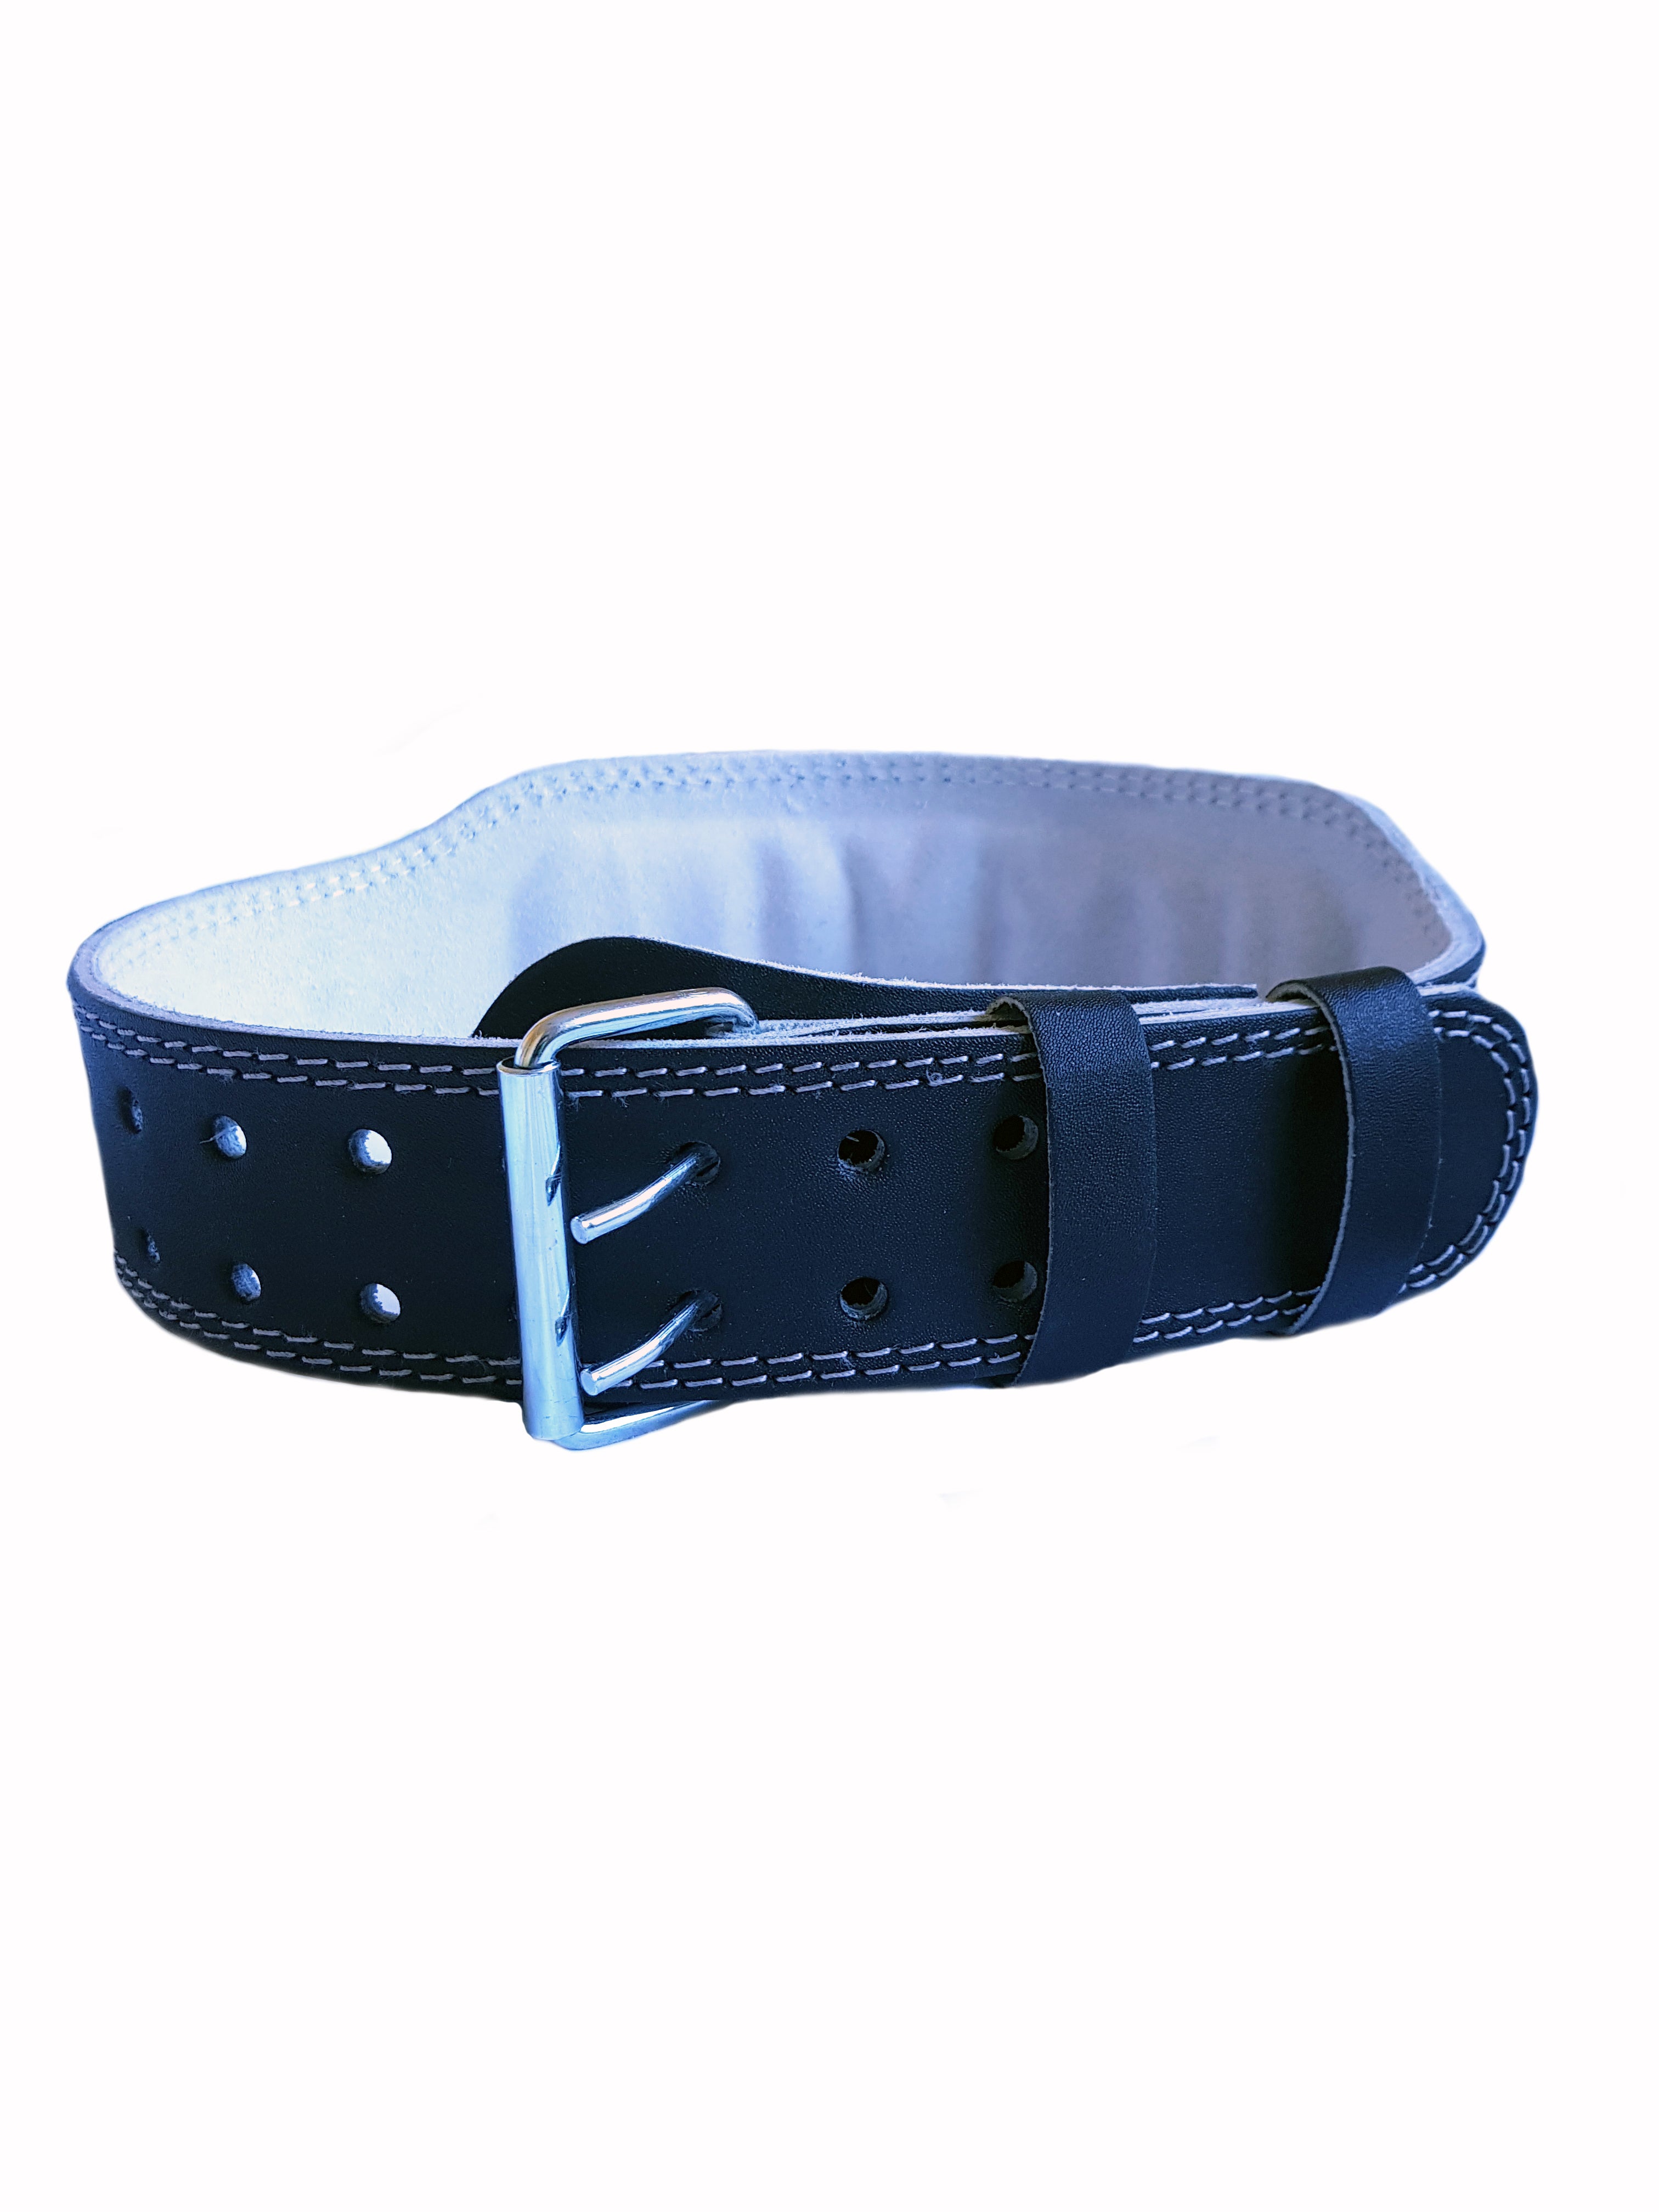 BEAR GRIP - Exercise and Lifting Belt